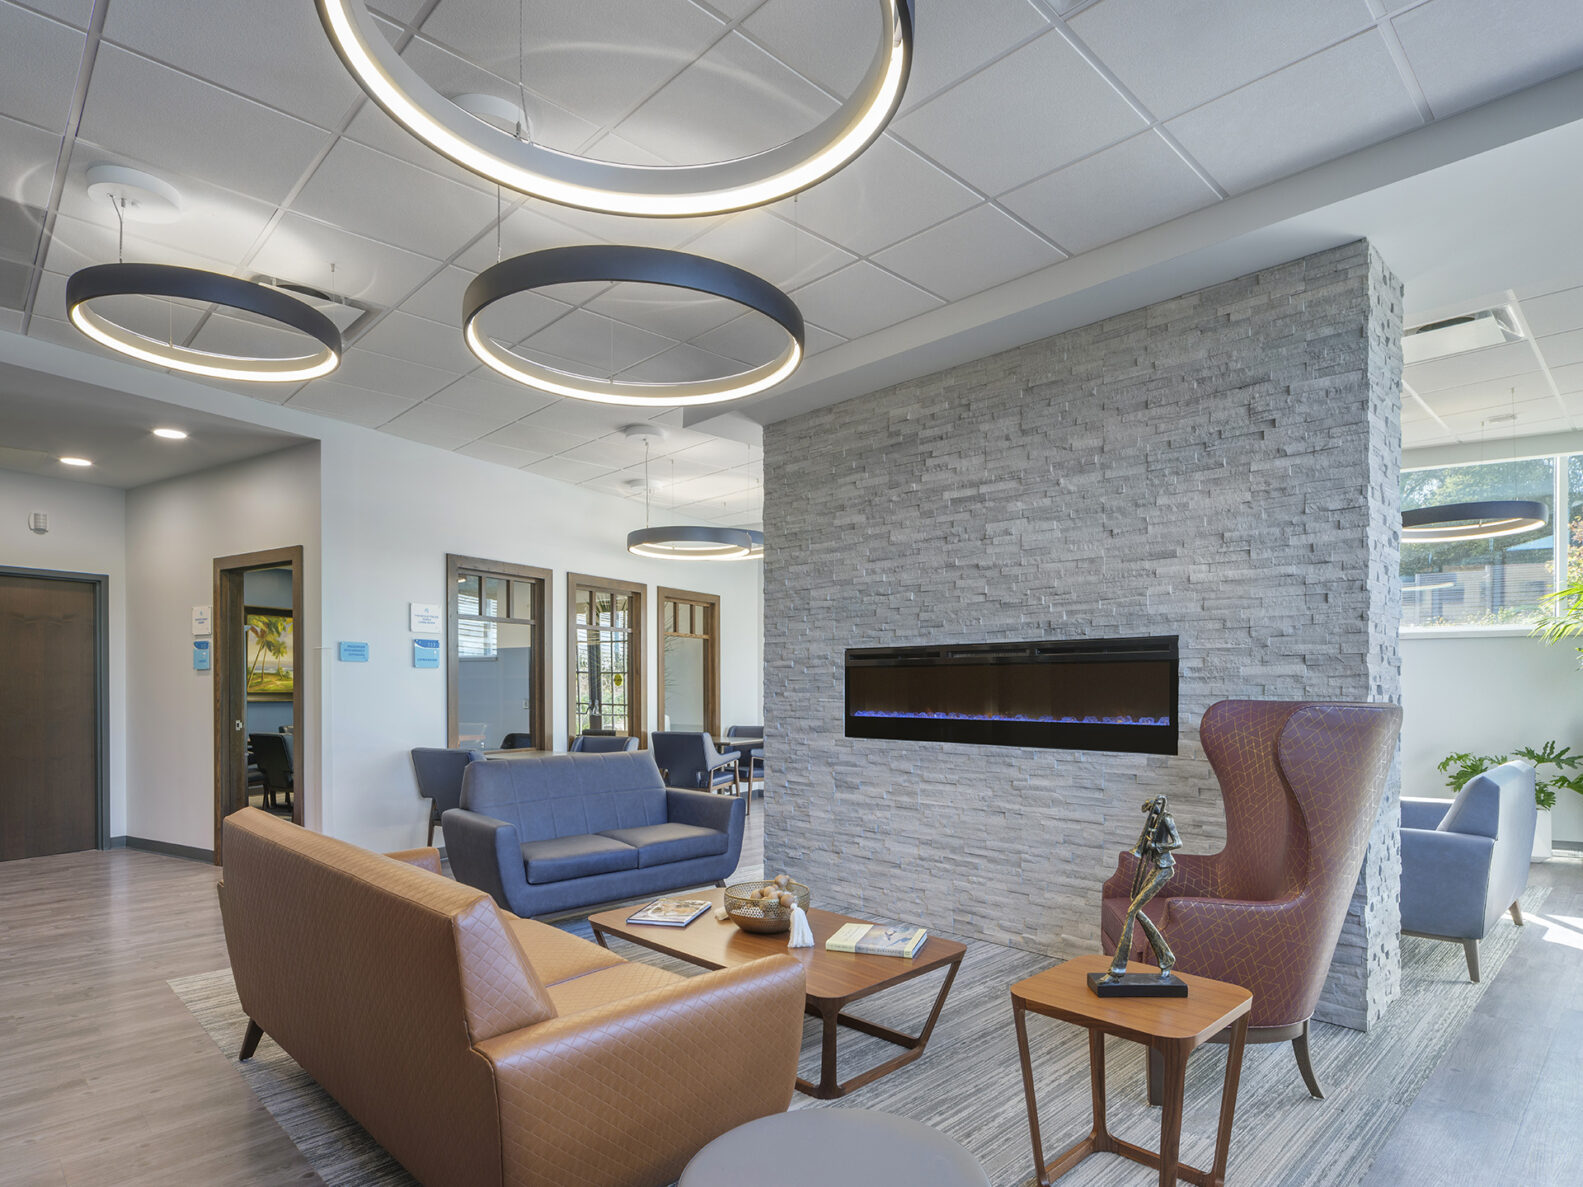 Lobby area to PACE KC Swope Health Adult Wellness Center, built by McCownGordon Construction